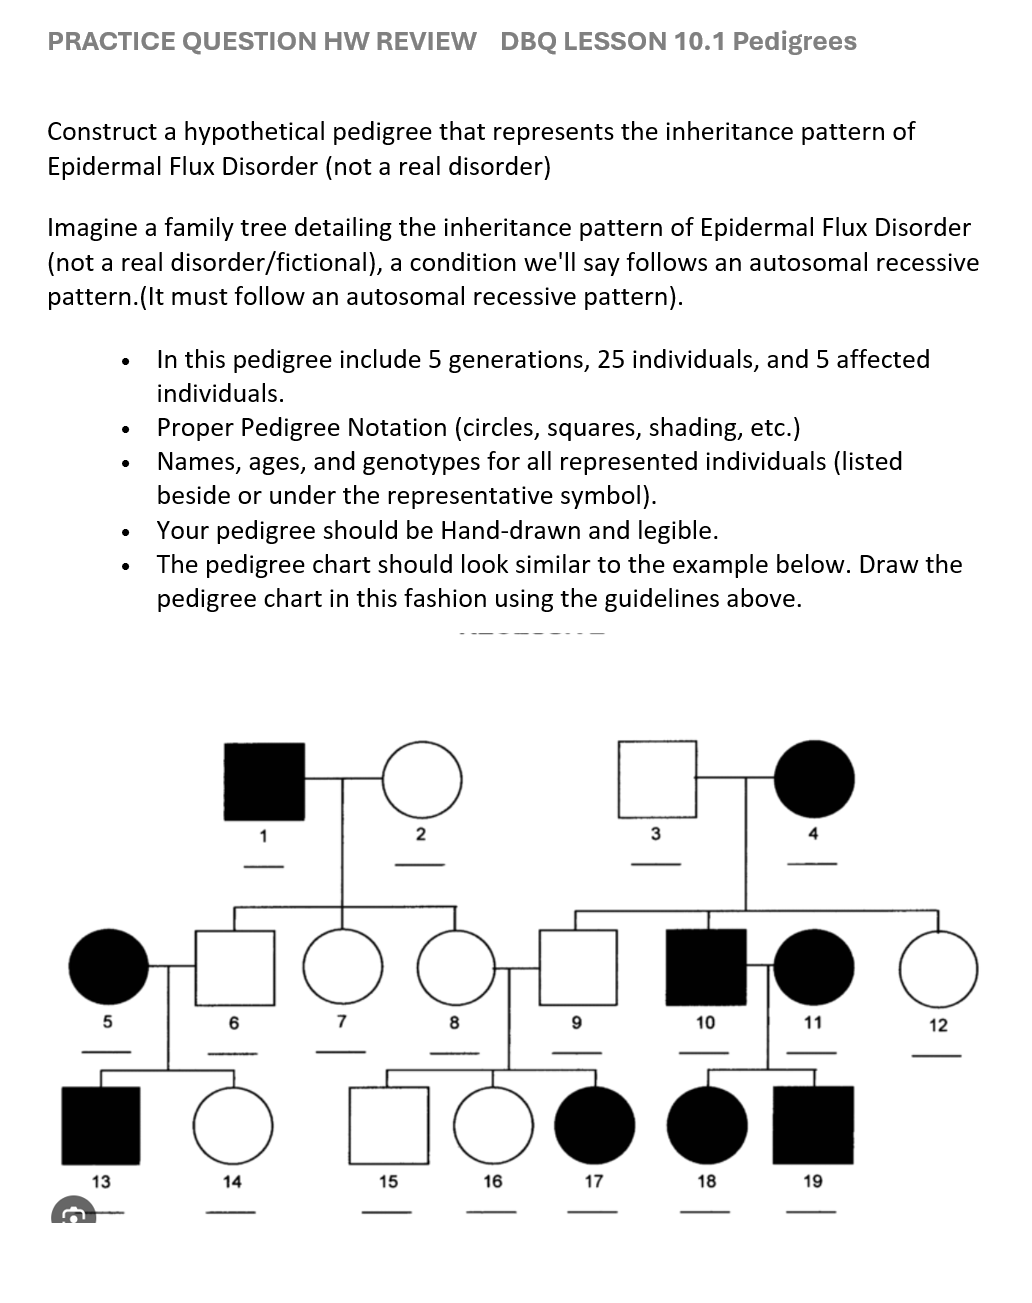 PRACTICE QUESTION HW REVIEW DBQ LESSON 10.1 Pedigrees
Construct a hypothetical pedigree that represents the inheritance pattern of
Epidermal Flux Disorder (not a real disorder)
Imagine a family tree detailing the inheritance pattern of Epidermal Flux Disorder
(not a real disorder/fictional), a condition we'll say follows an autosomal recessive
pattern.(It must follow an autosomal recessive pattern).
•
•
•
•
•
In this pedigree include 5 generations, 25 individuals, and 5 affected
individuals.
Proper Pedigree Notation (circles, squares, shading, etc.)
Names, ages, and genotypes for all represented individuals (listed
beside or under the representative symbol).
Your pedigree should be Hand-drawn and legible.
The pedigree chart should look similar to the example below. Draw the
pedigree chart in this fashion using the guidelines above.
2
5
6
8
9
10
11
12
о
13
14
15
16
17
18
19